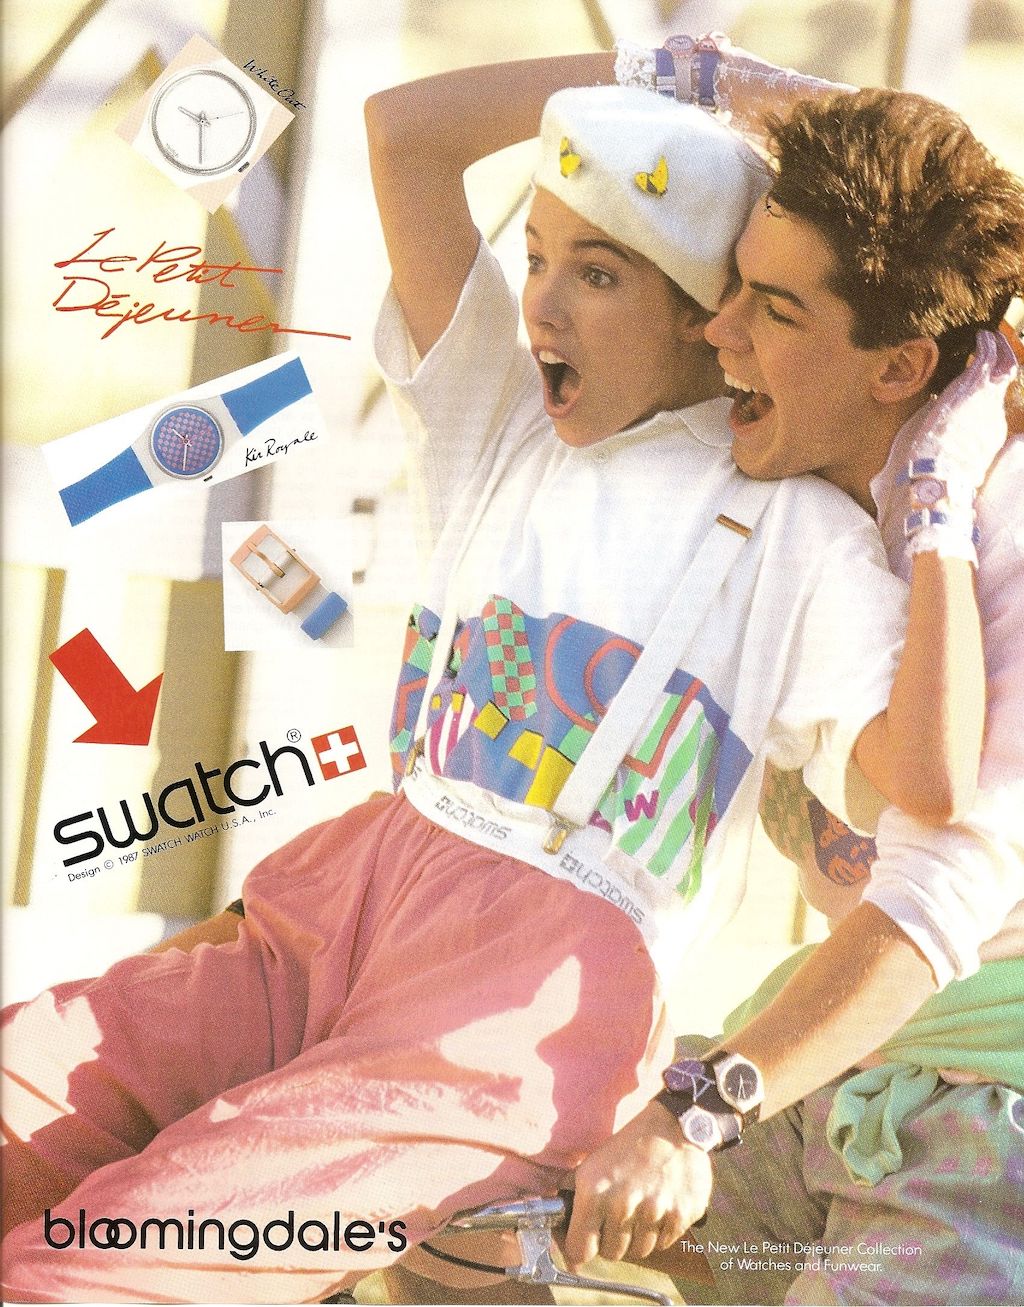 swatch watches